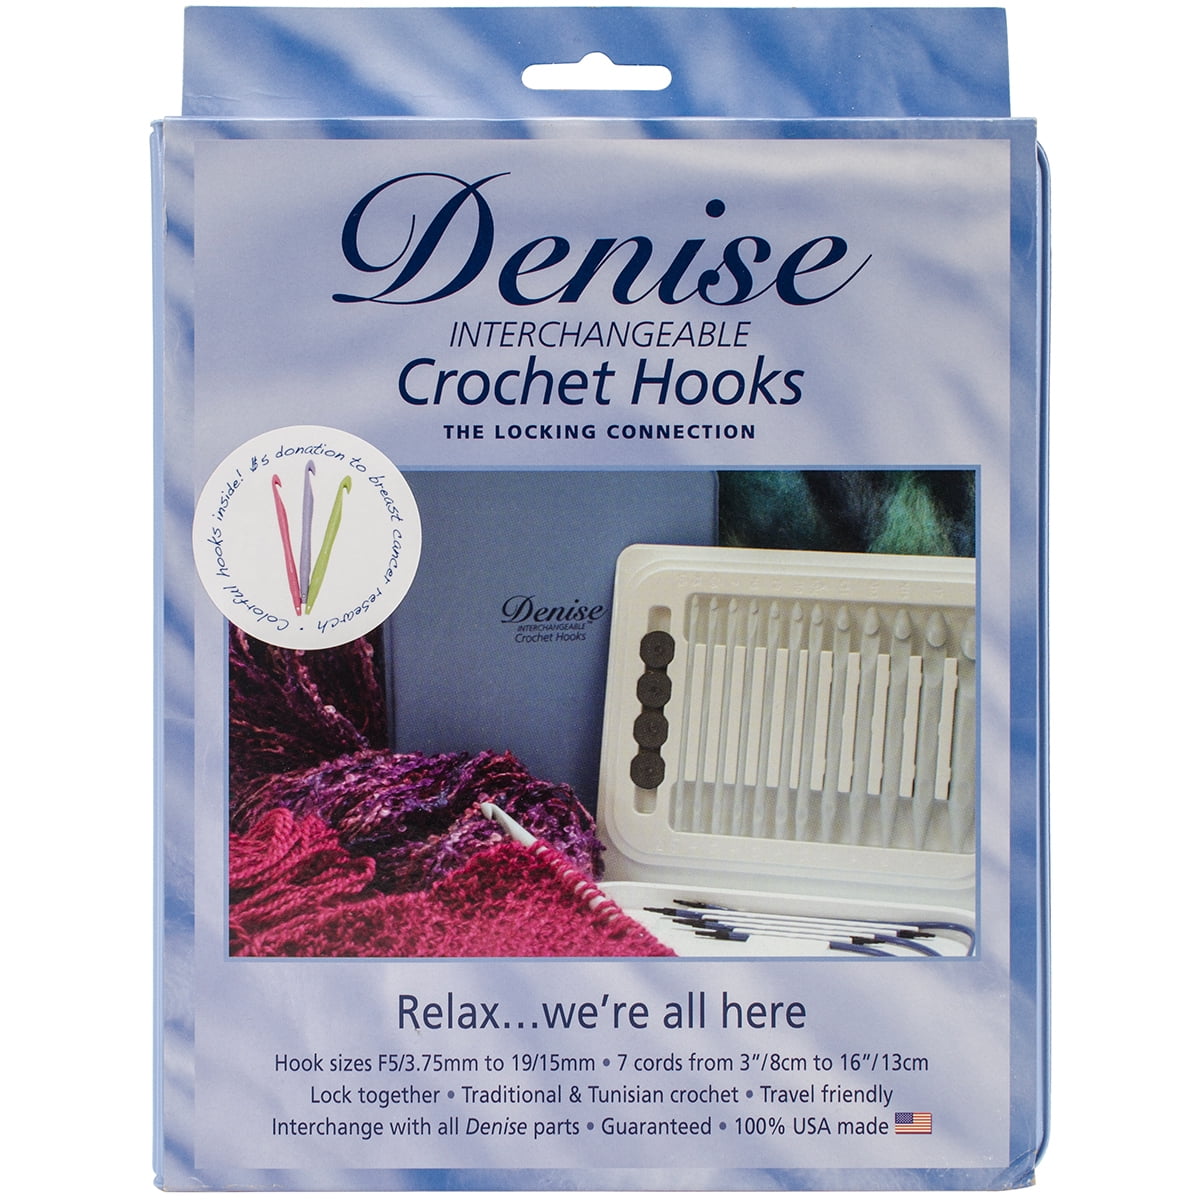 Denise2Go Double Ended Tunisian Crochet Hooks: Review & Coupon Code! -  moogly